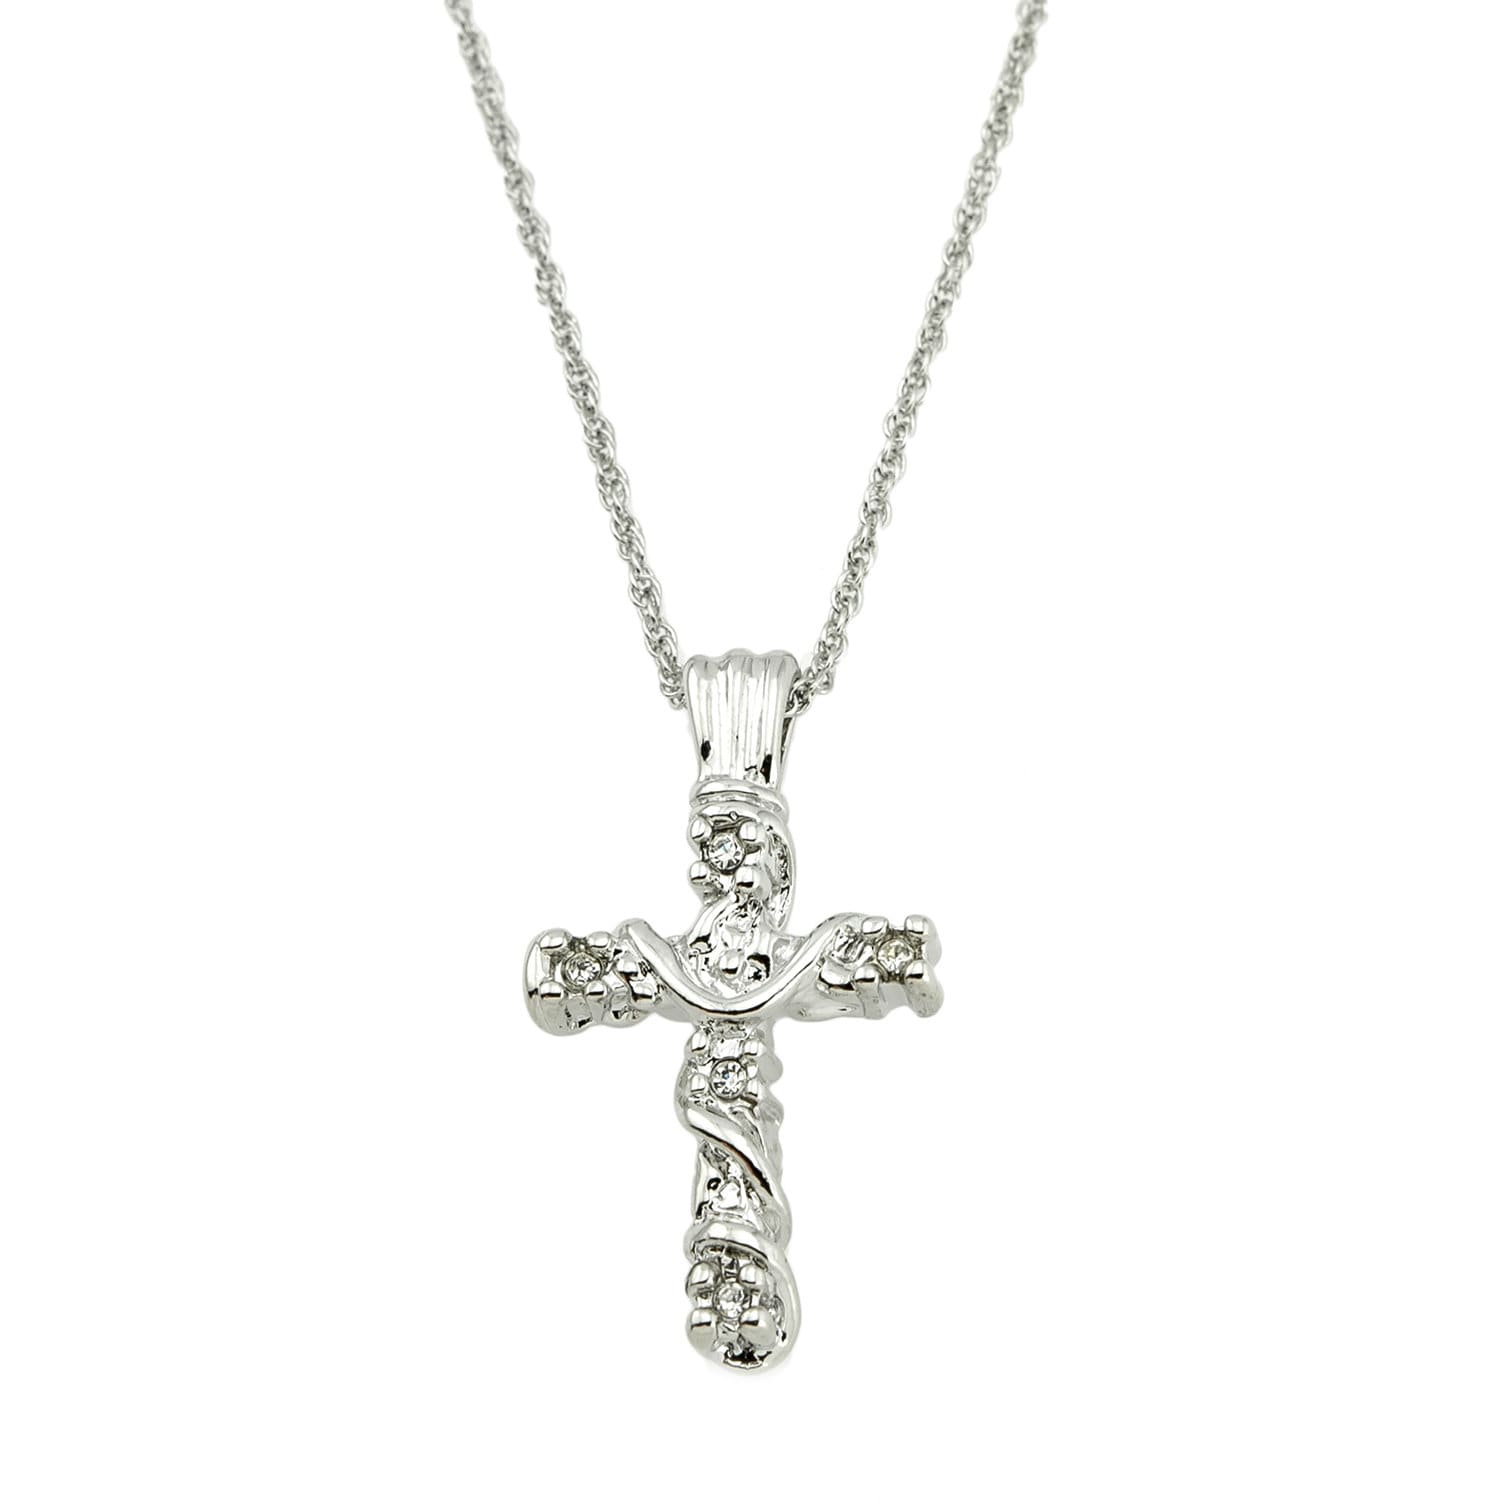 Mariana Spirit of Design Silver Cross Necklace with Swarovski Crystals –  The Treasure Tower